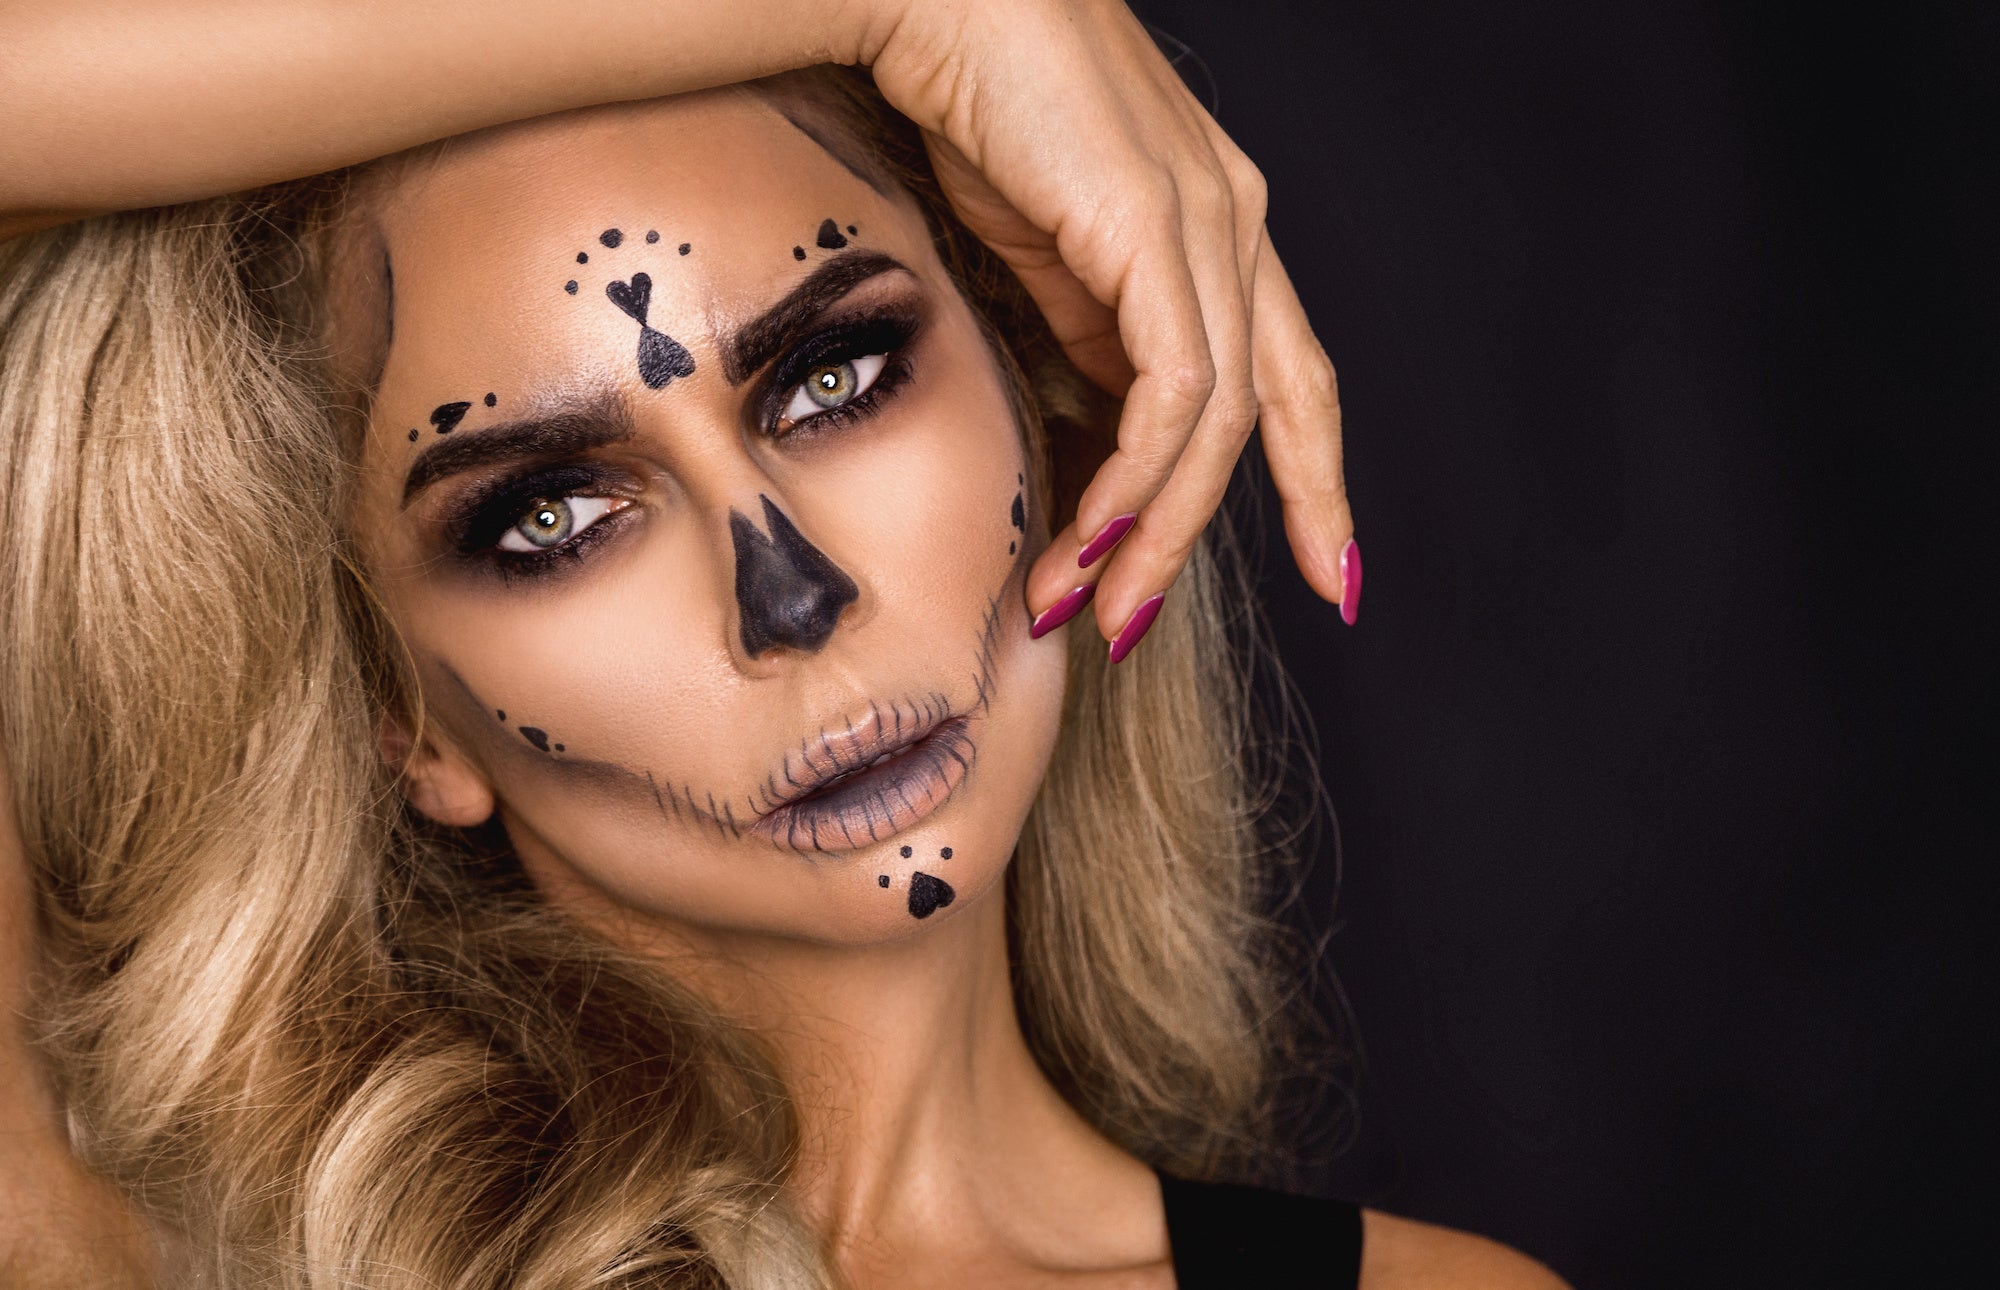 5 tips to protect your eyes from Halloween face paint